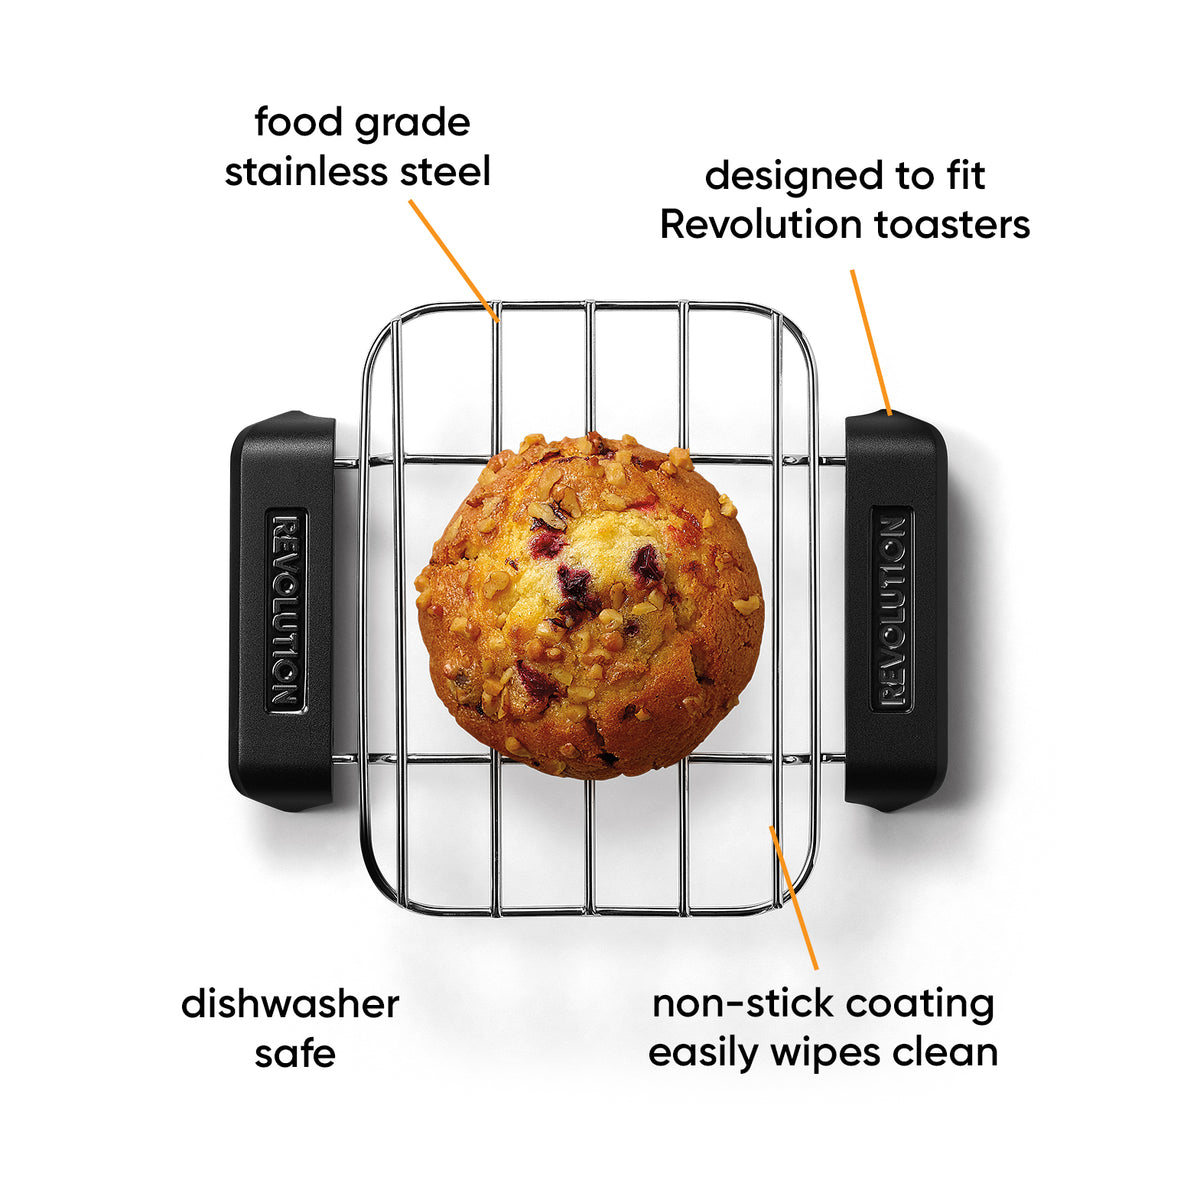 warming rack with muffin on white background. call outs of features. Text says "food grade stainless steel, designed to fit Revolution Toasters, dishwasher safe, non-stick coating easily wipes clean"